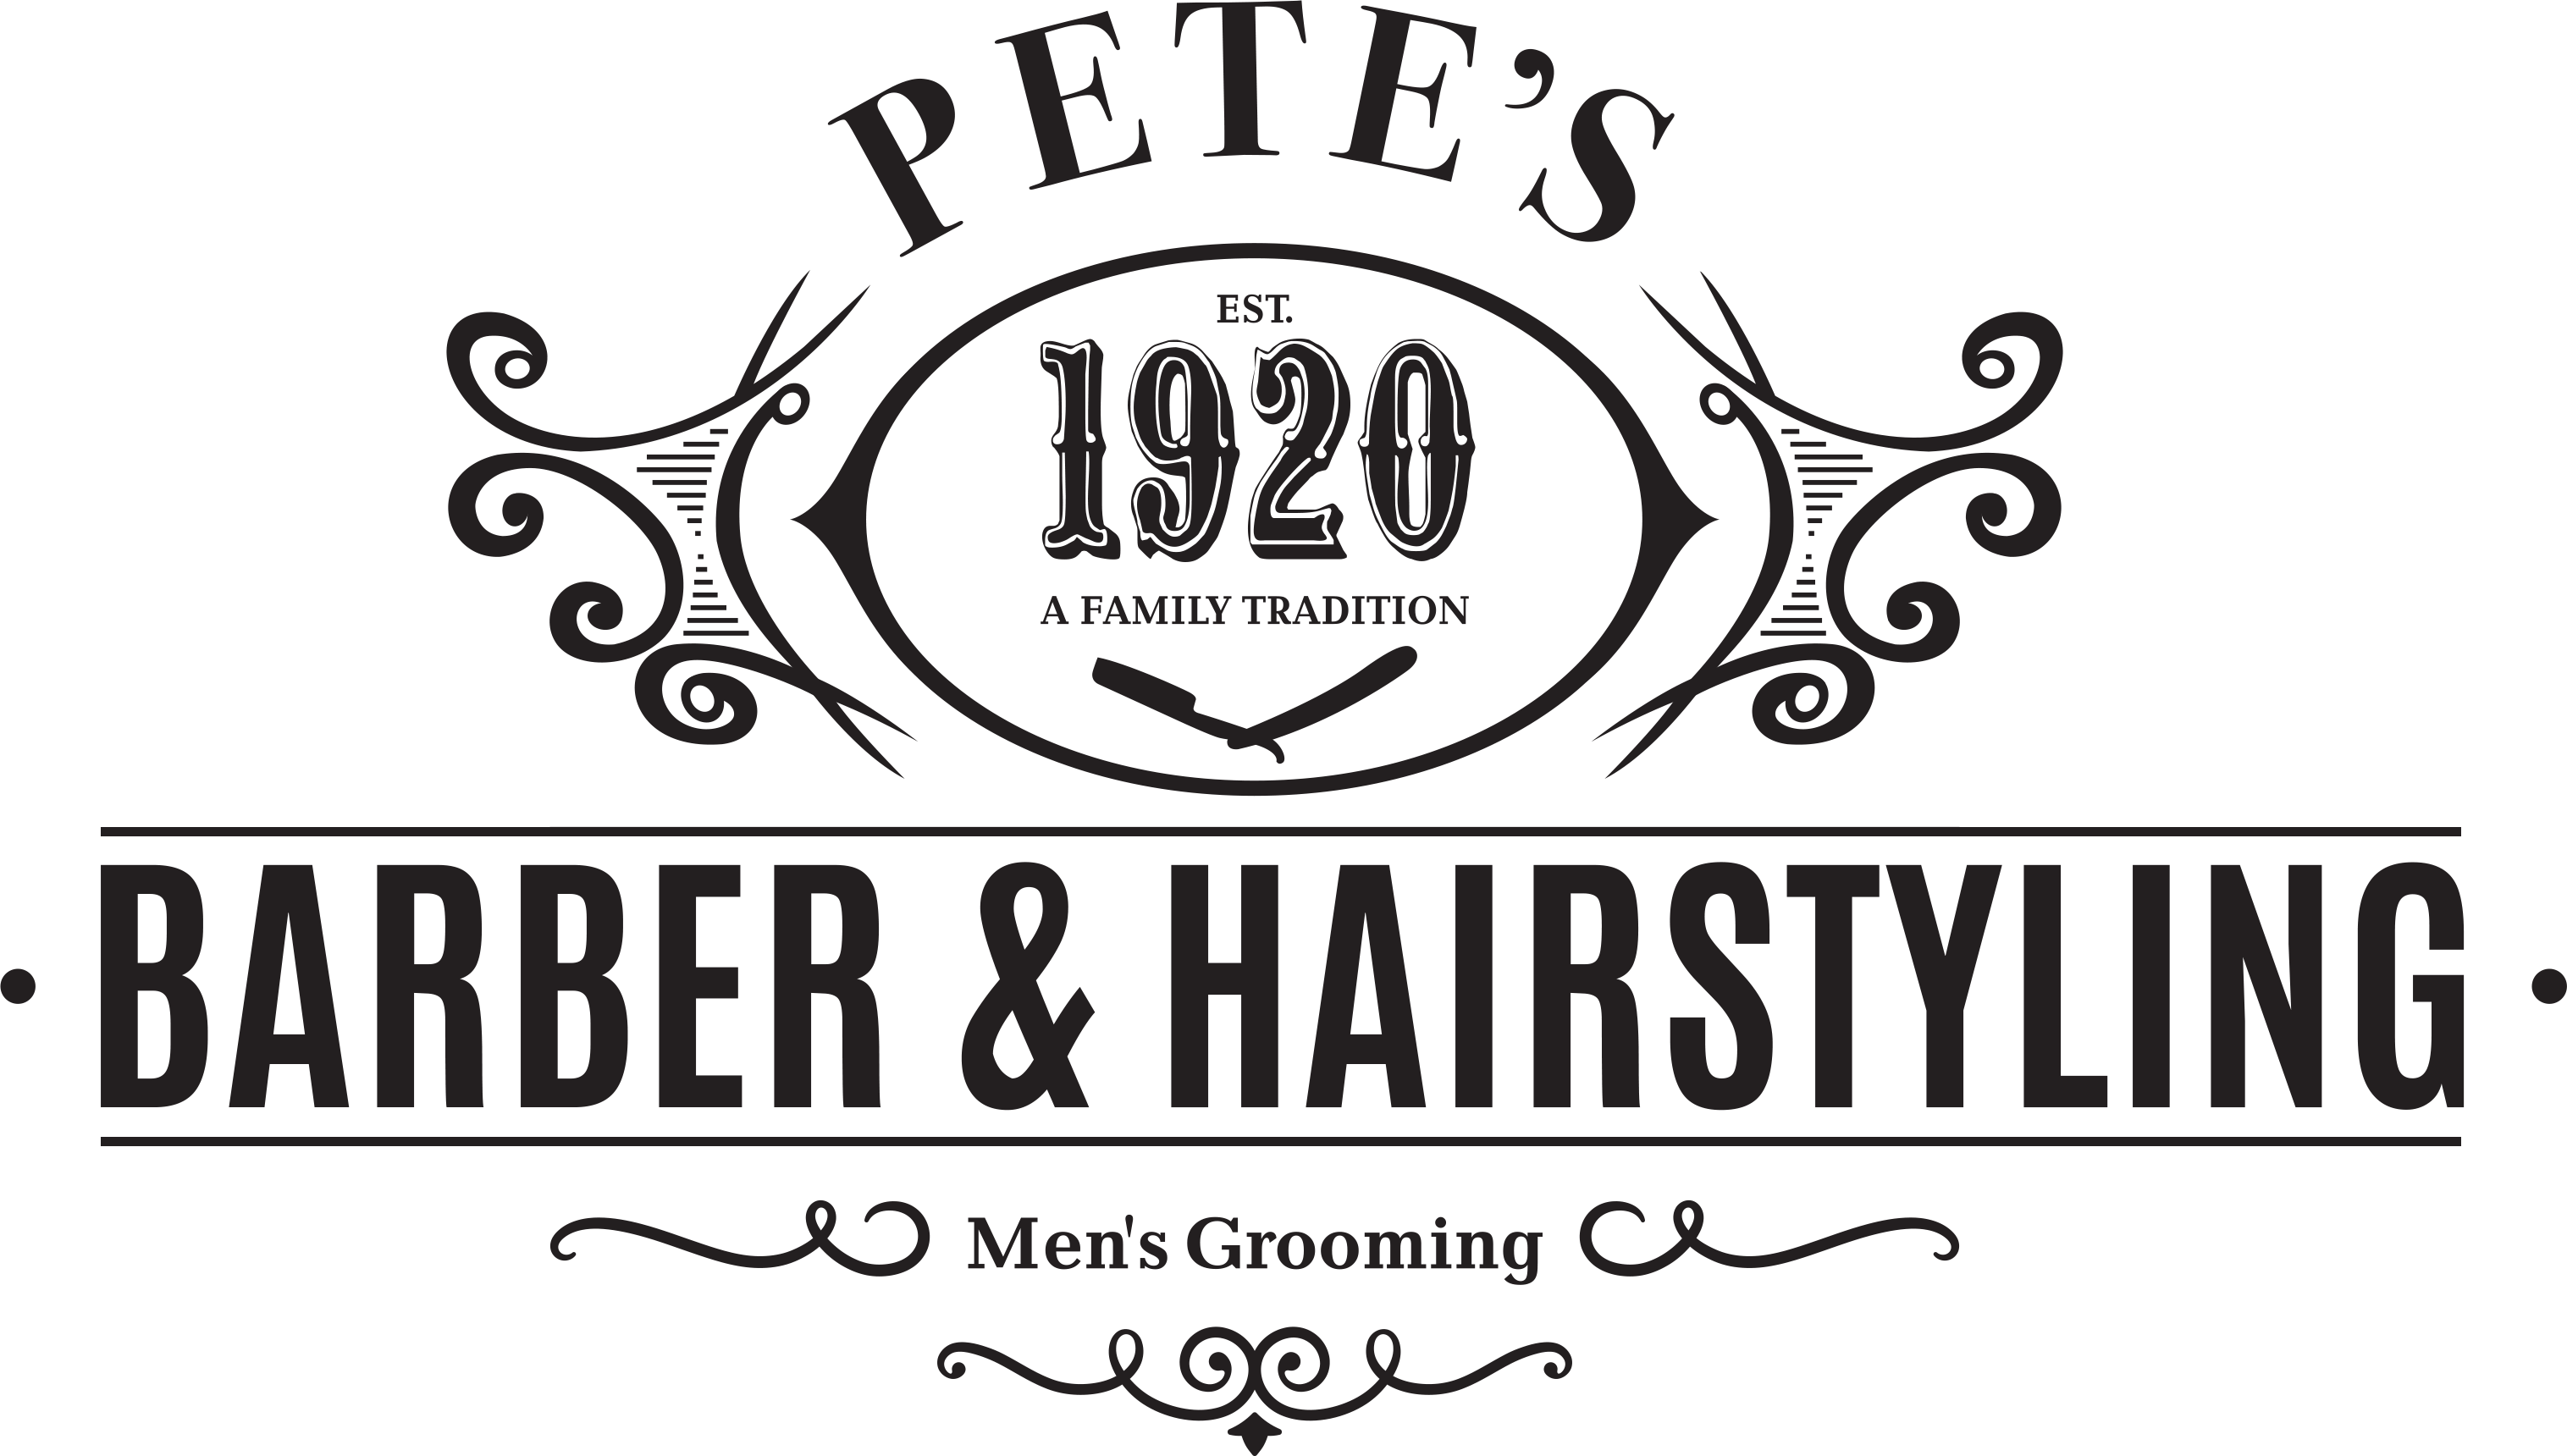 Pete's Barber & Hairstyling